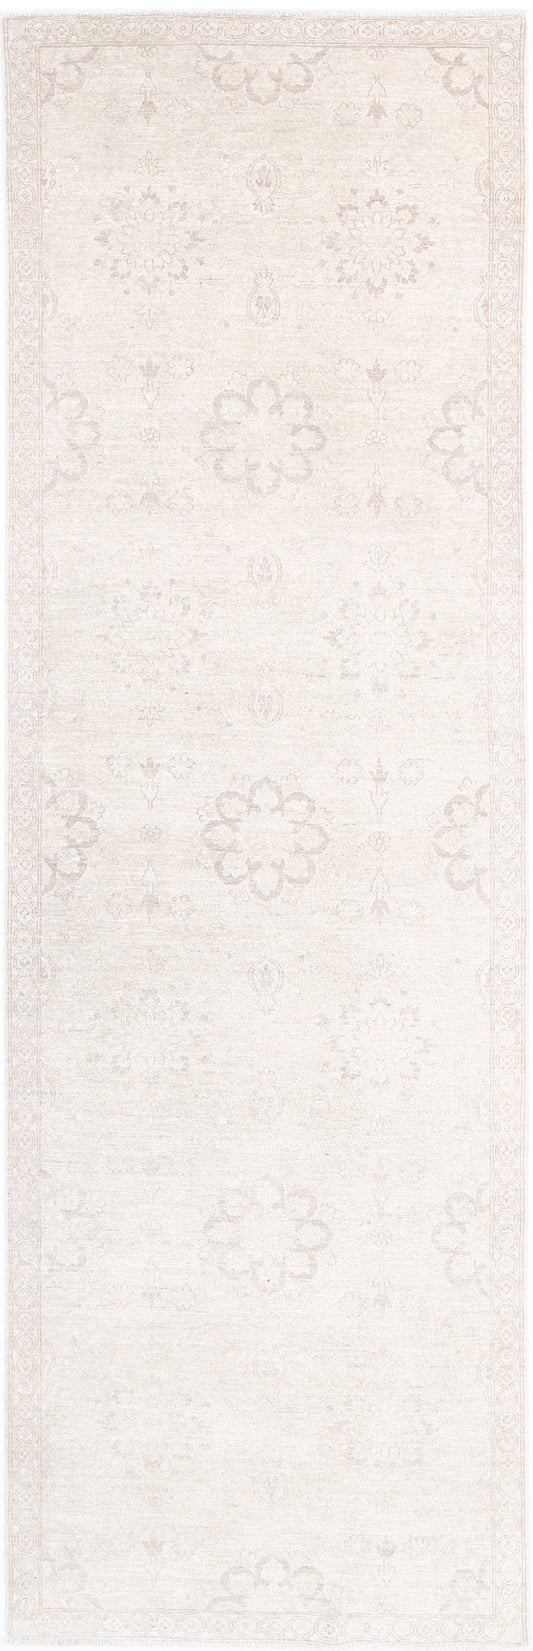 Traditional Hand Knotted Serenity Tabriz Wool Rug of Size 3'0'' X 9'10'' in Ivory and Grey Colors - Made in Afghanistan